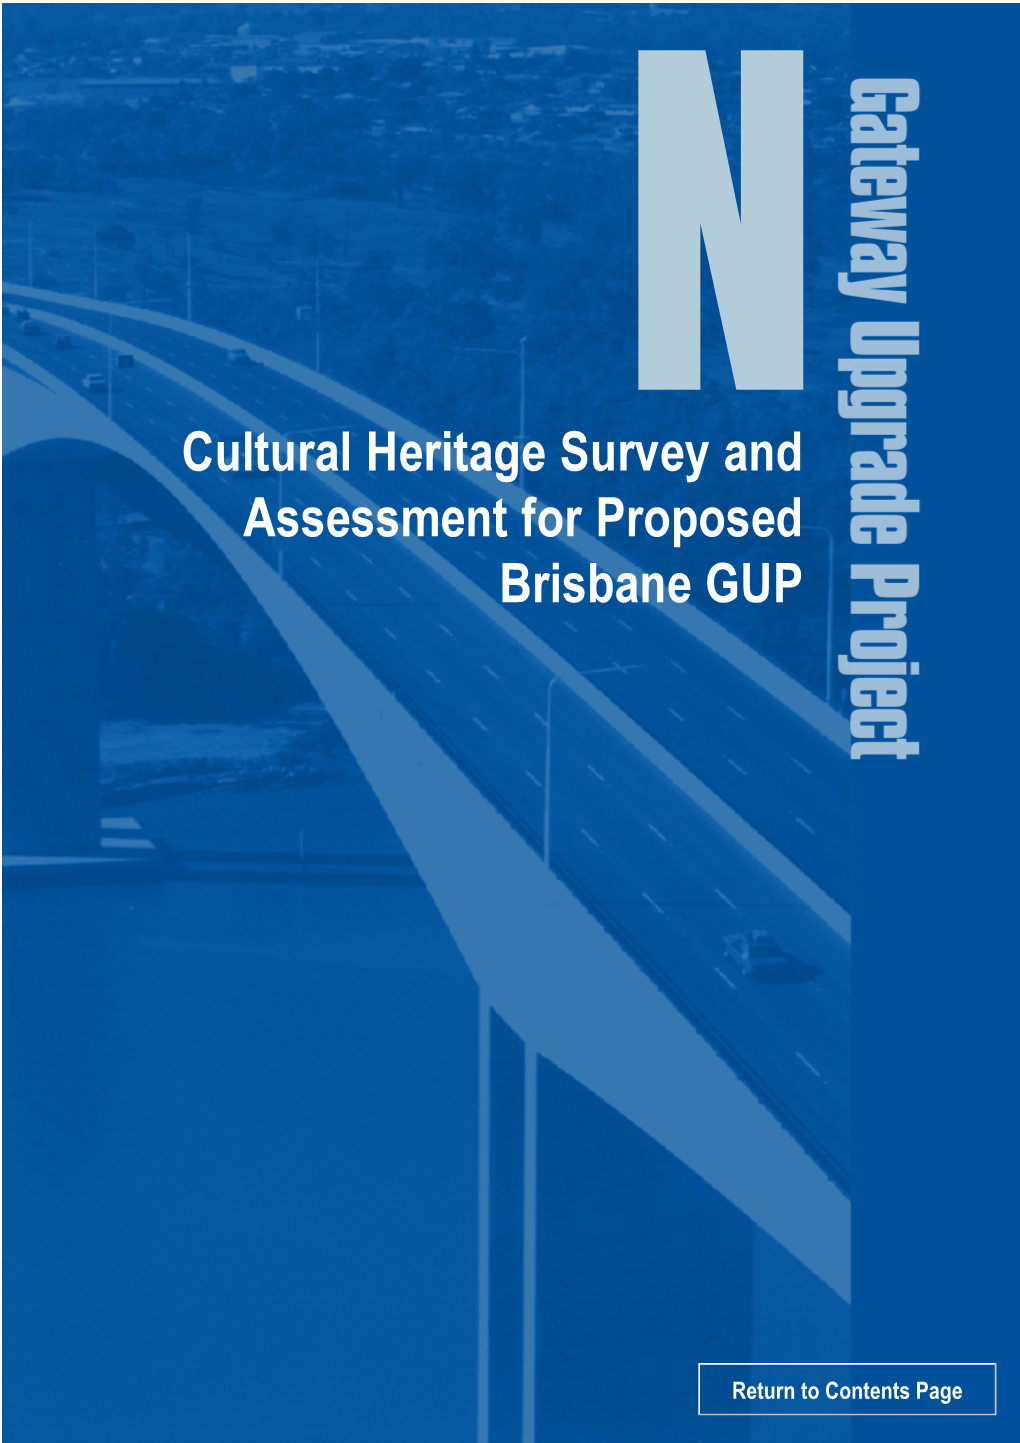 Cultural Heritage Survey and Assessment for Proposed Brisbane